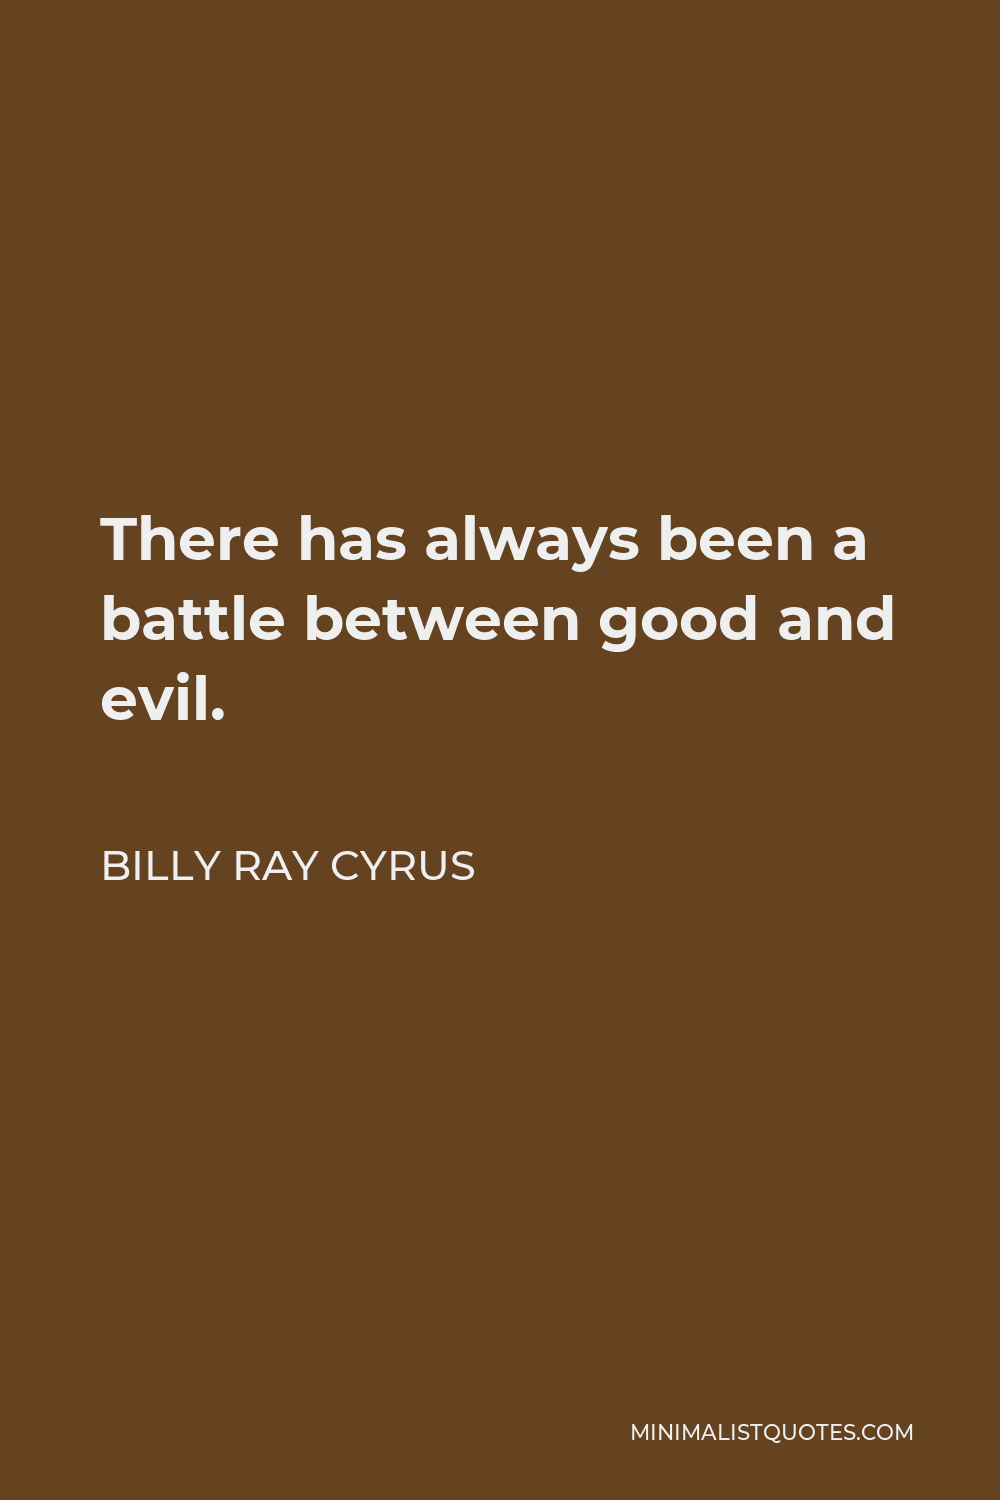 Billy Ray Cyrus Quote - There has always been a battle between good and evil.